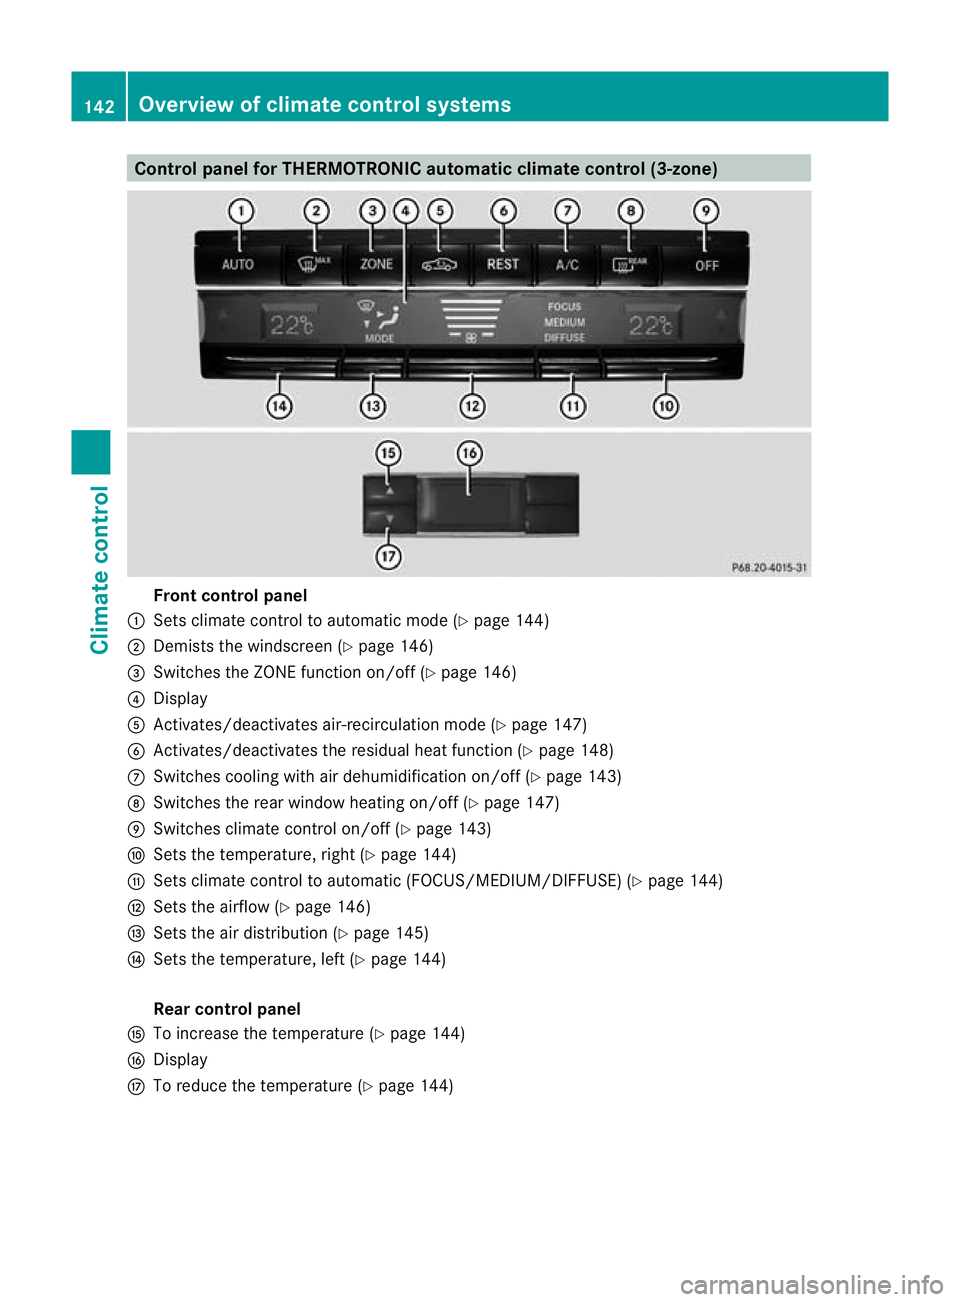 MERCEDES-BENZ E-CLASS CABRIOLET 2012  Owners Manual Control panel for THERMOTRONIC automatic climate control (3-zone)
Fron
tcontrol panel
: Sets climate control to automatic mode (Y page 144)
; Demists the windscreen (Y page 146)
= Switches the ZONE fu